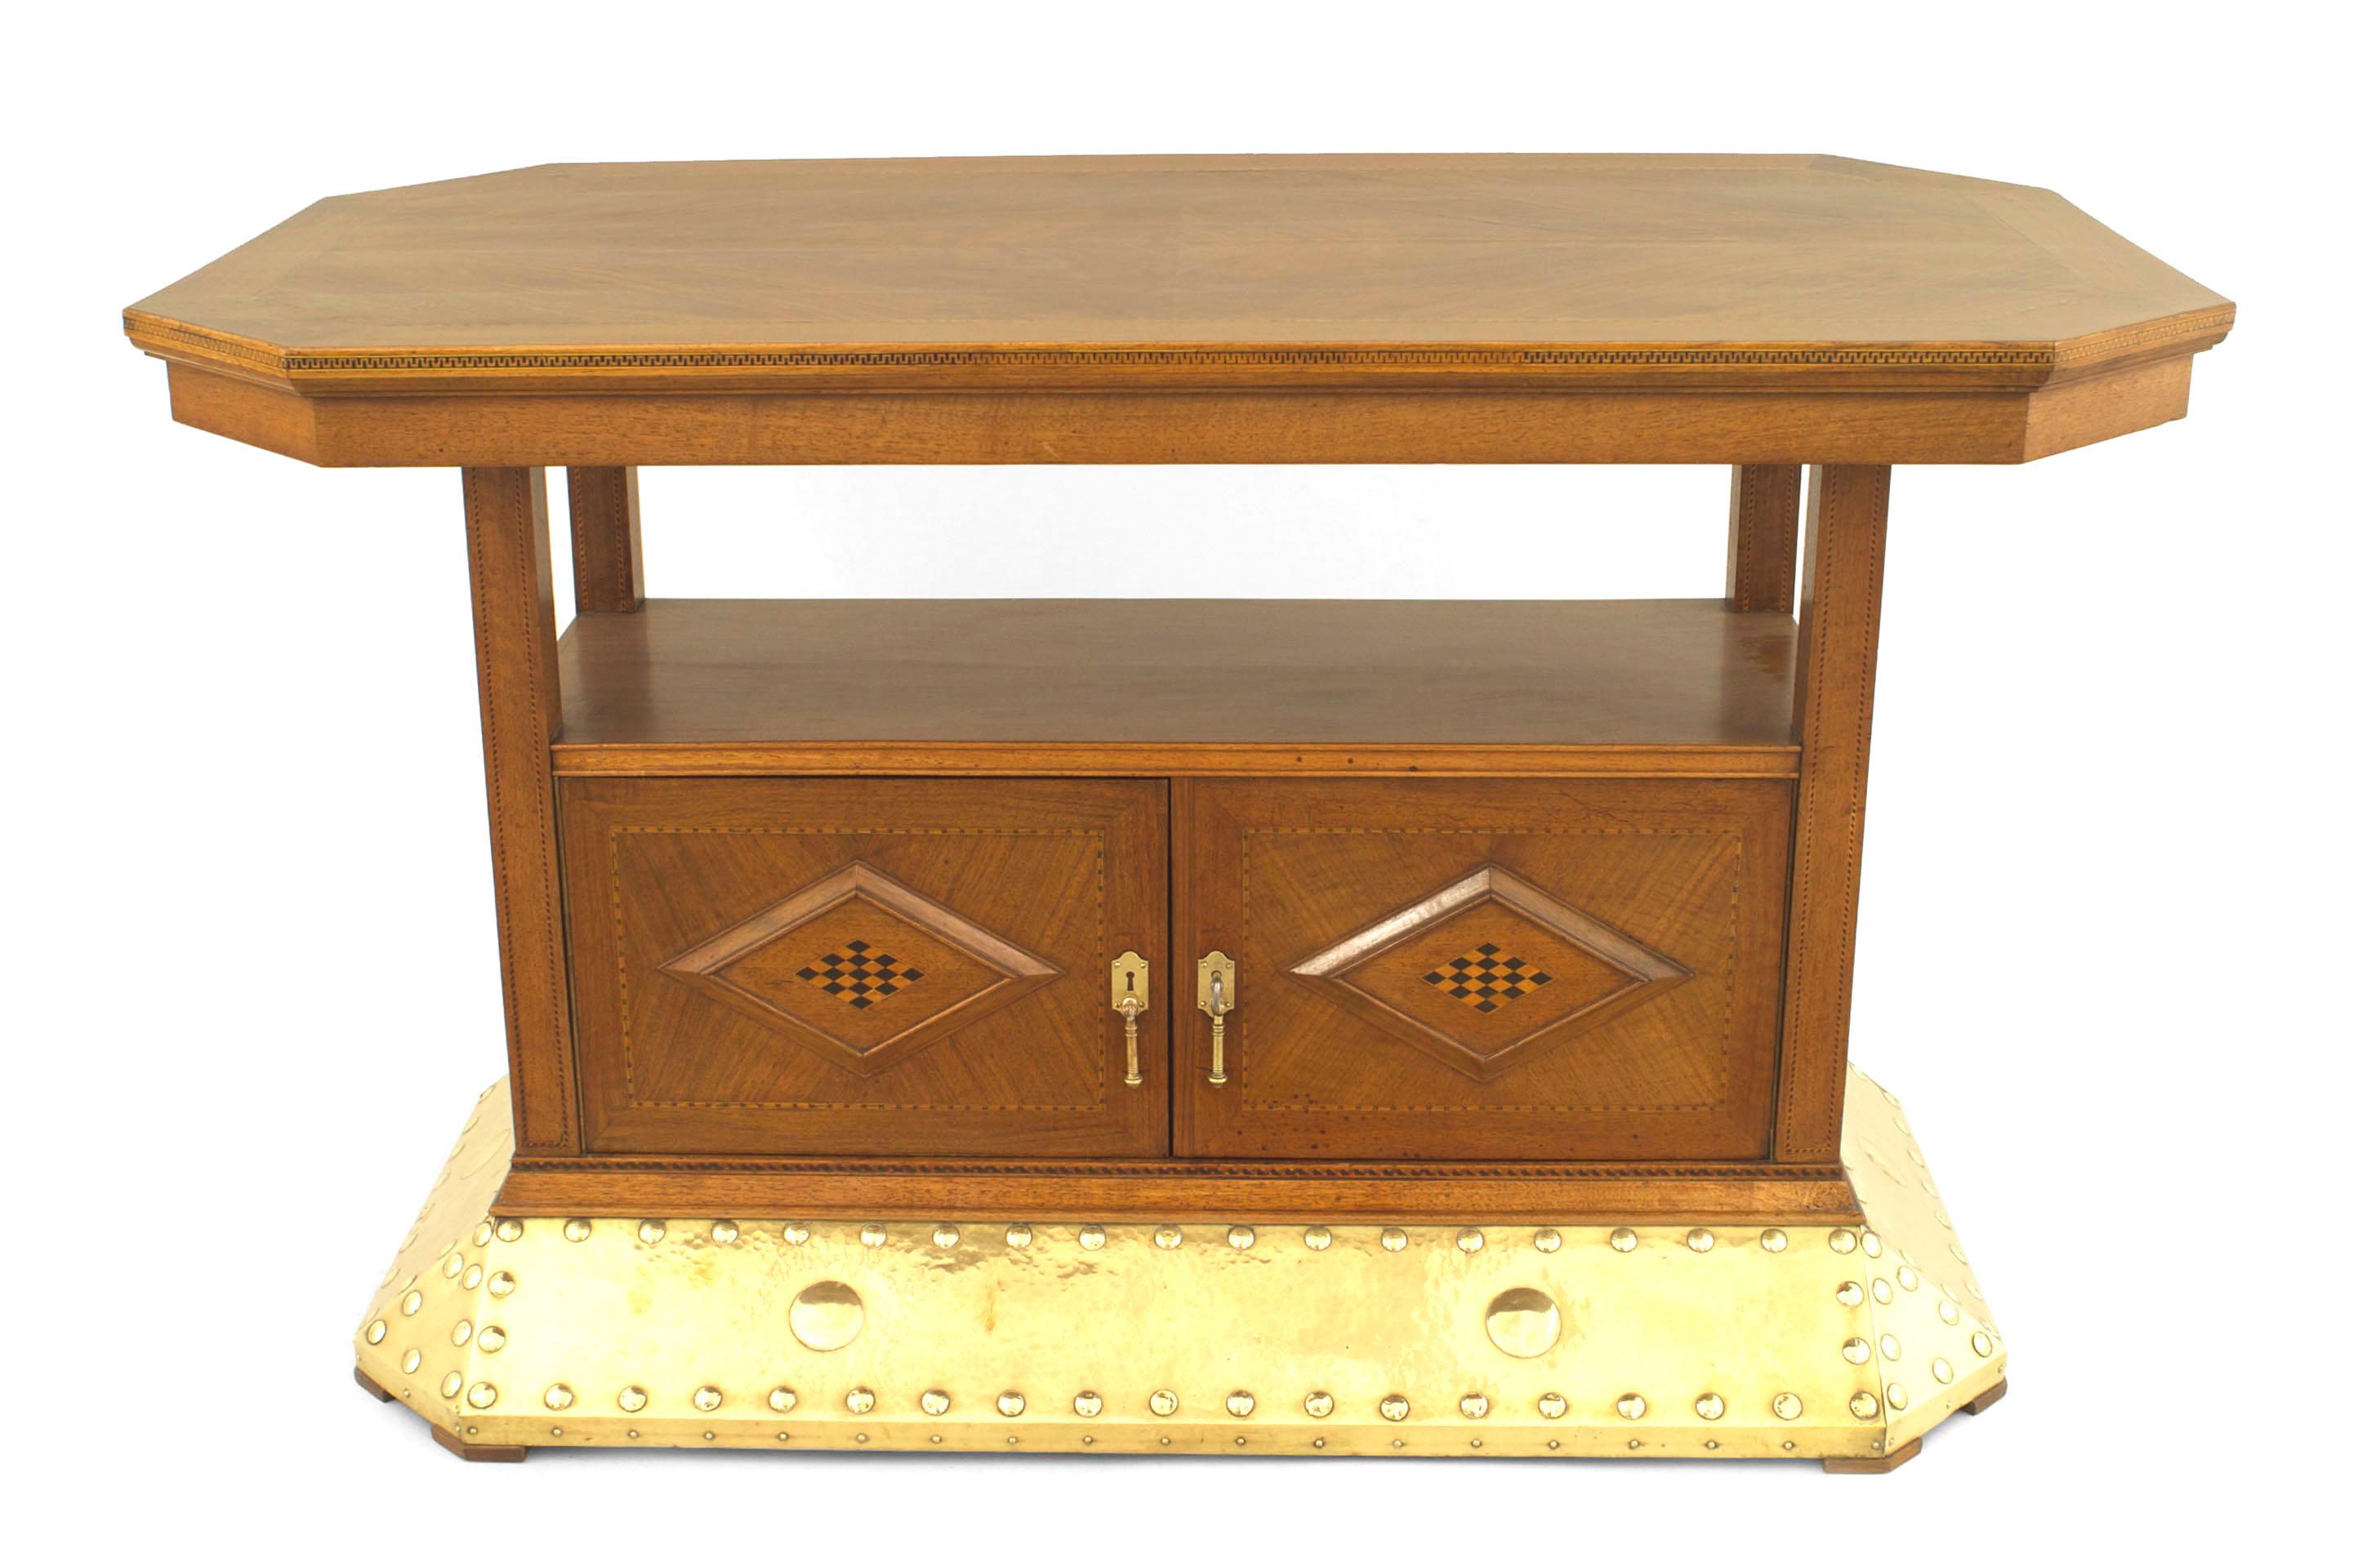 Continental Dutch Arts & Crafts walnut and oak rectangular center table with banded inlaid trim and a bottom shelf over 2 doors with diamond design resting on a flared brass trimmed base.
   